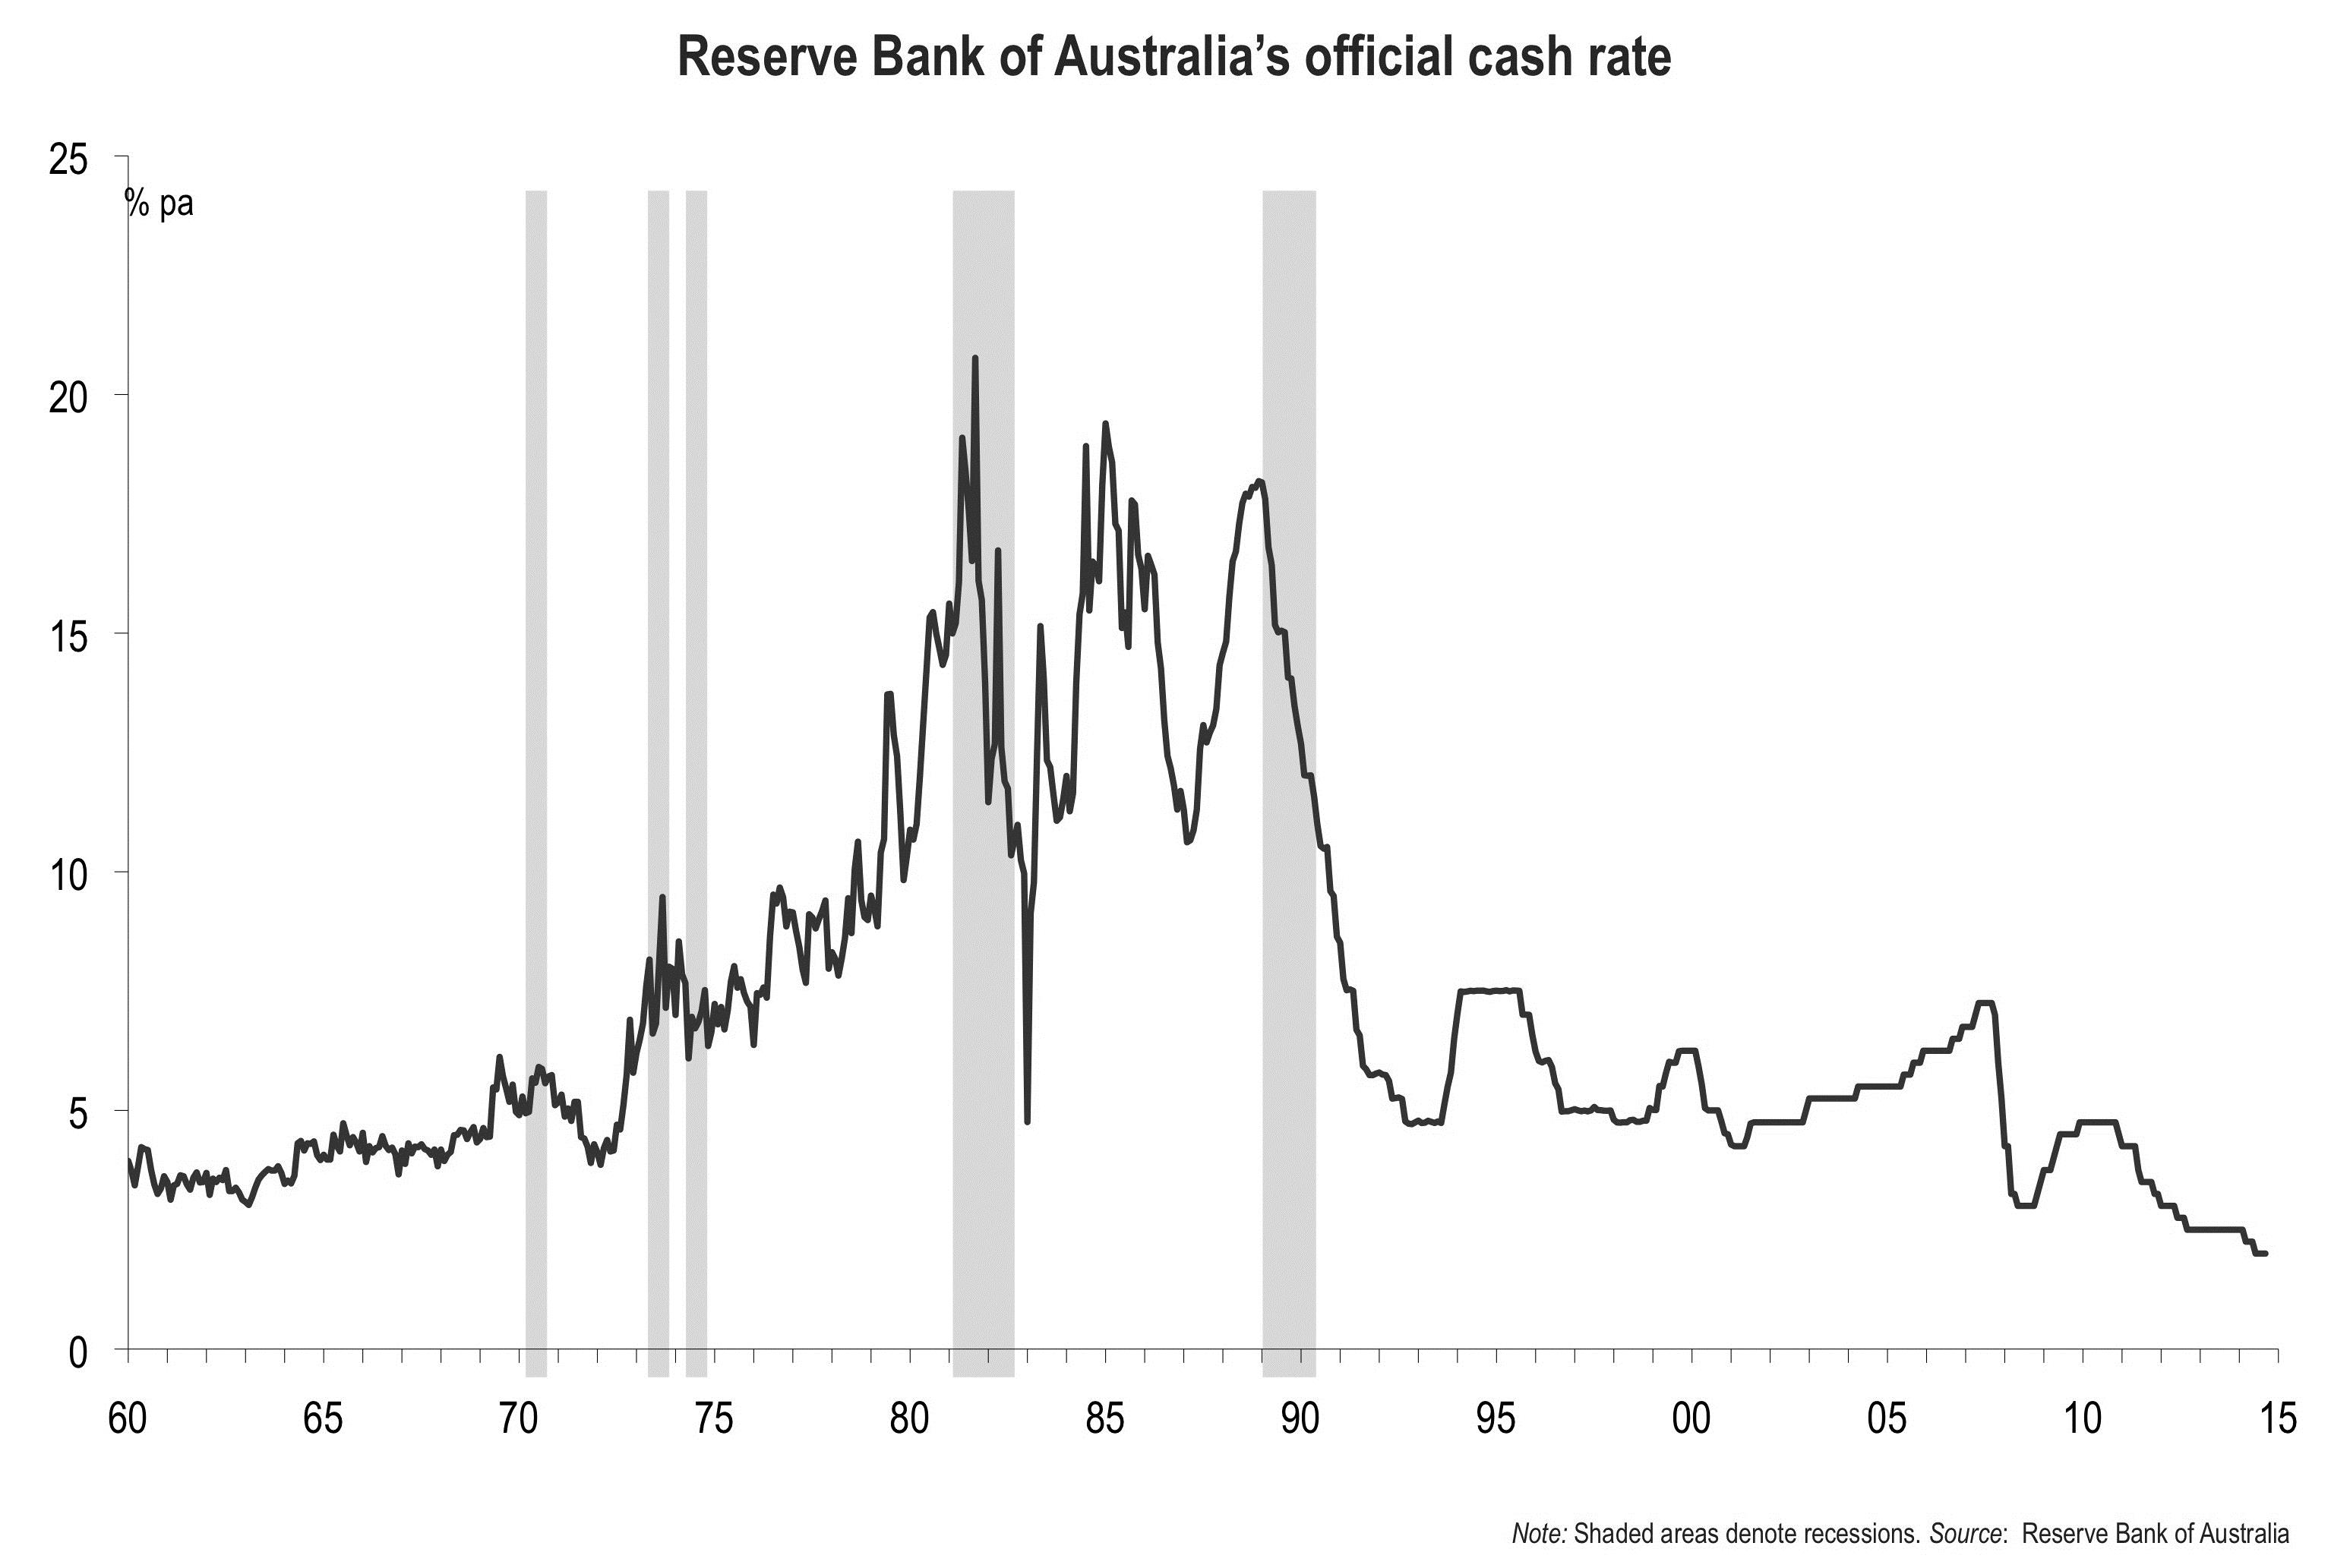 Figure 15: Reserve Bank of Australia’s official cash rate (1960 – 2015).